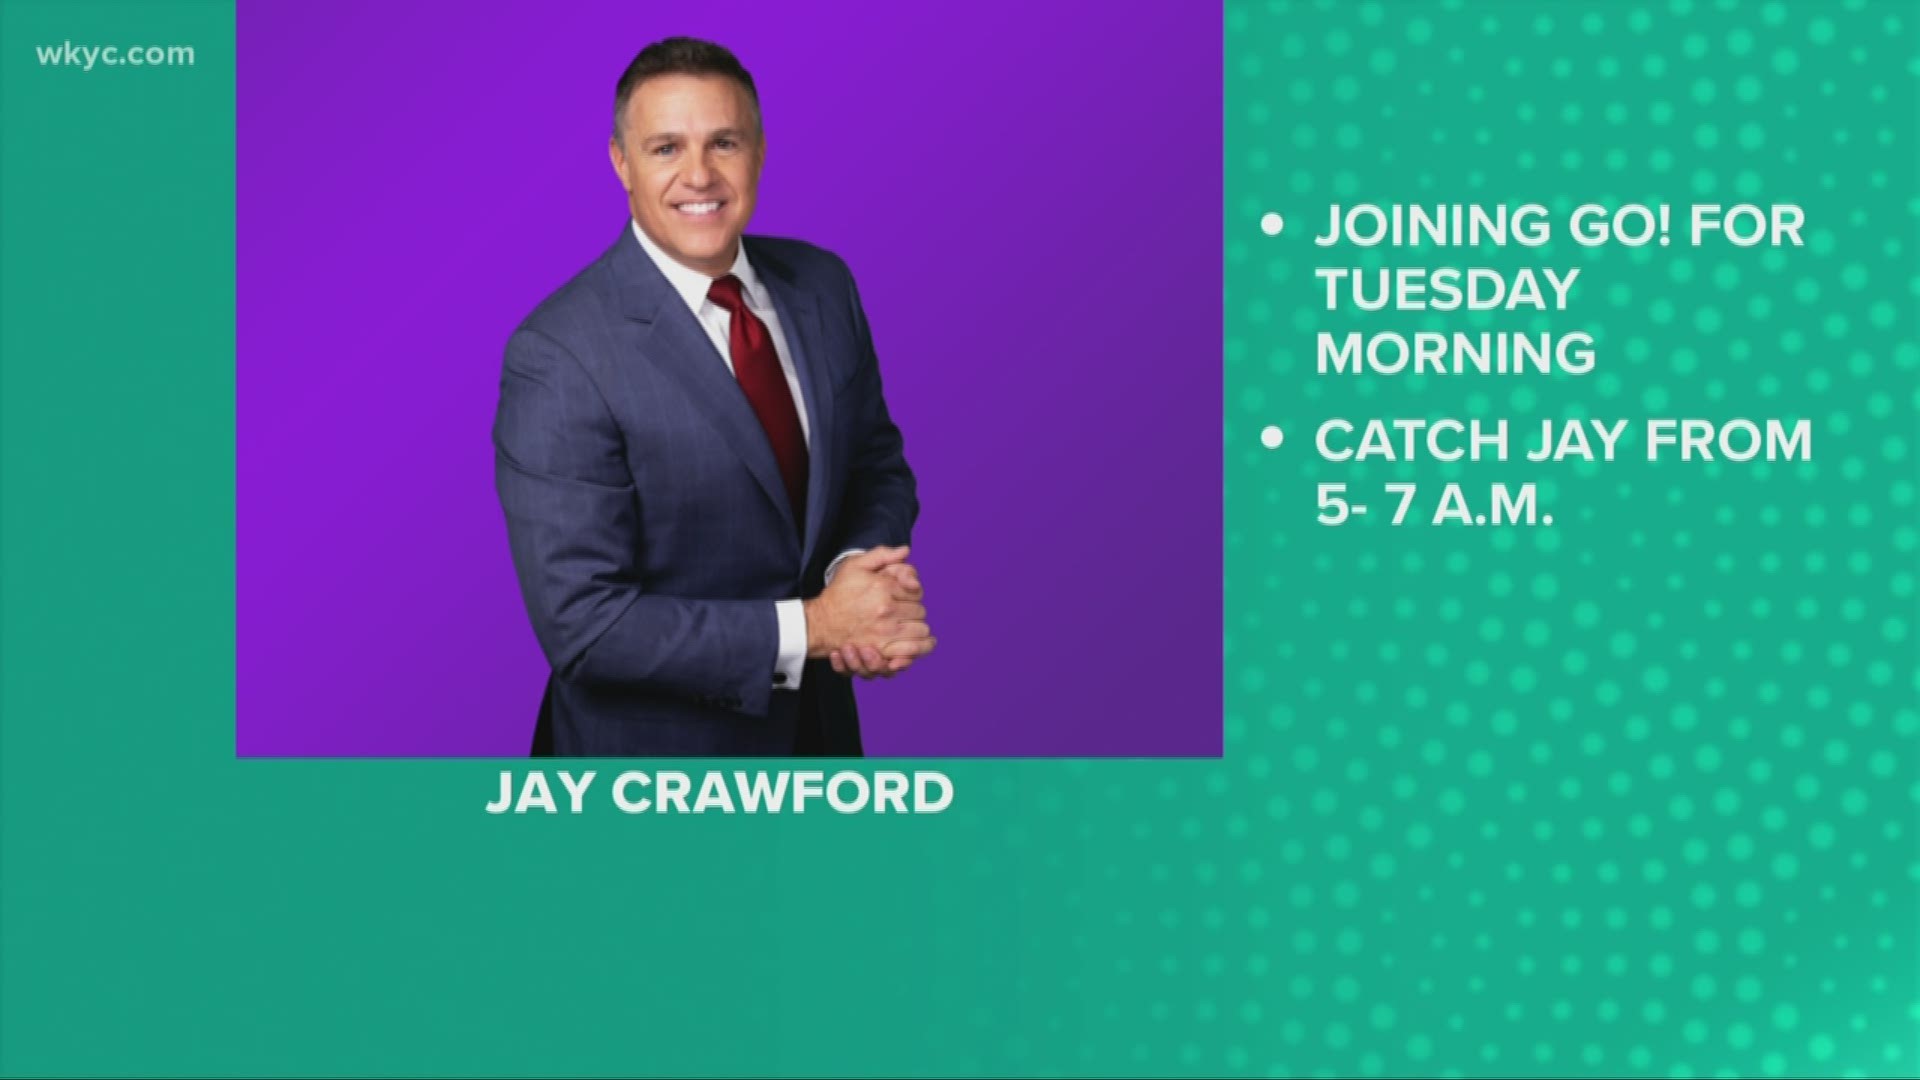 While Dave Chudowsky is away in Arizona to cover the Cleveland Indians spring training, Jay Crawford is waking up early with us to guest co-host Tuesday morning.